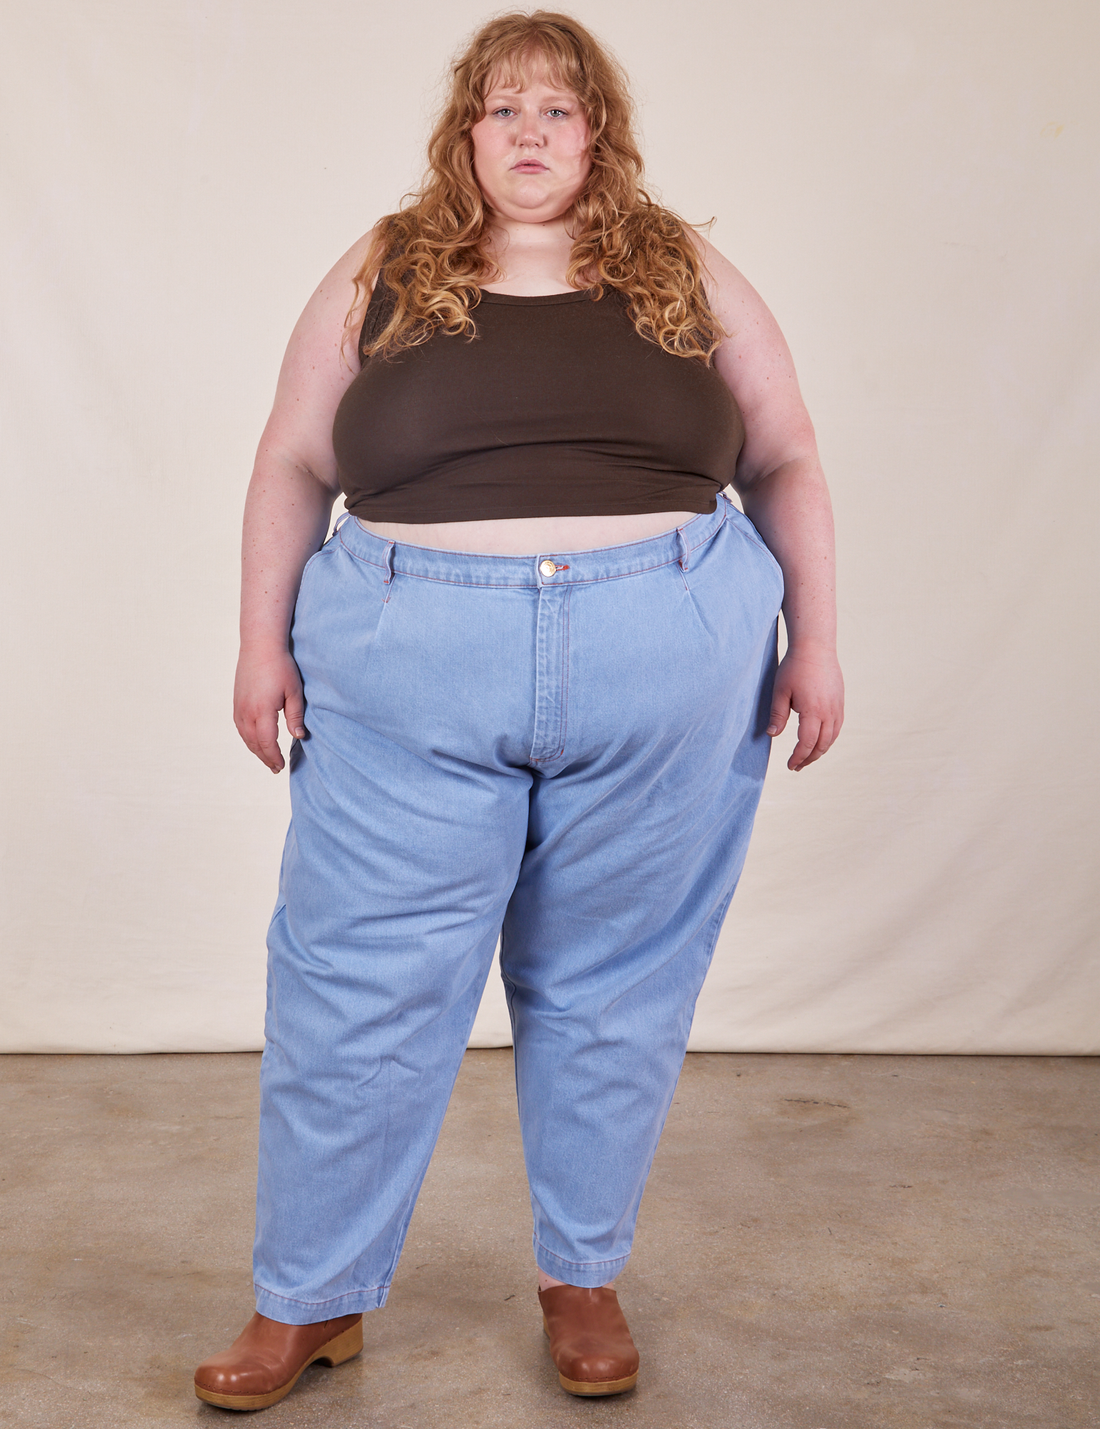 Catie is 5'11" and wearing 4XL Cropped Tank Top in Espresso Brown paired with light wash Denim Trousers